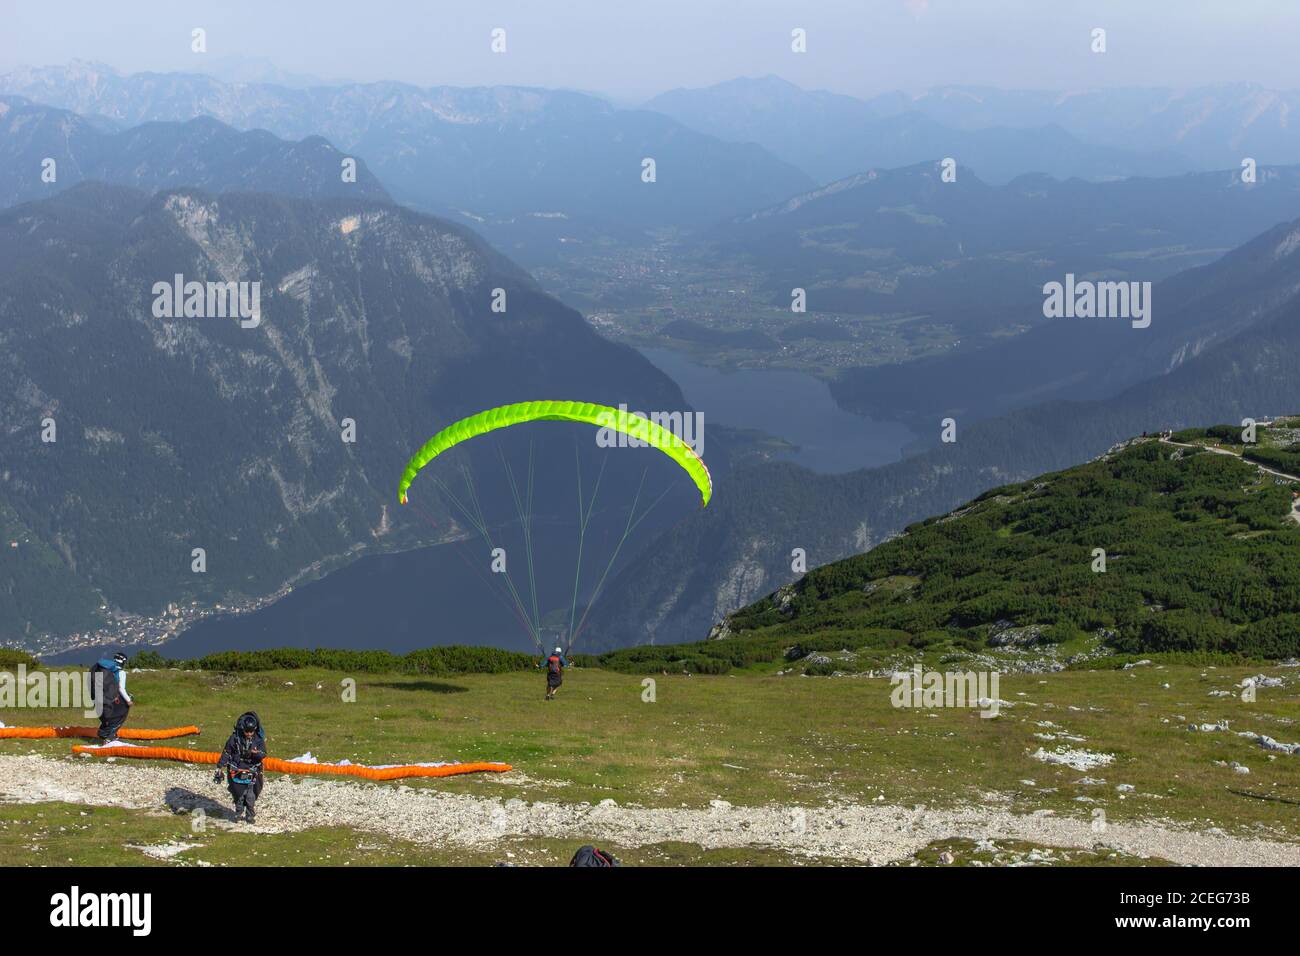 A paraglider at the start of the Krippenstein mountain in the Dachstein area,Austria.Paraglide silhouette over Hallstatter See.Extreme adrenaline spor Stock Photo